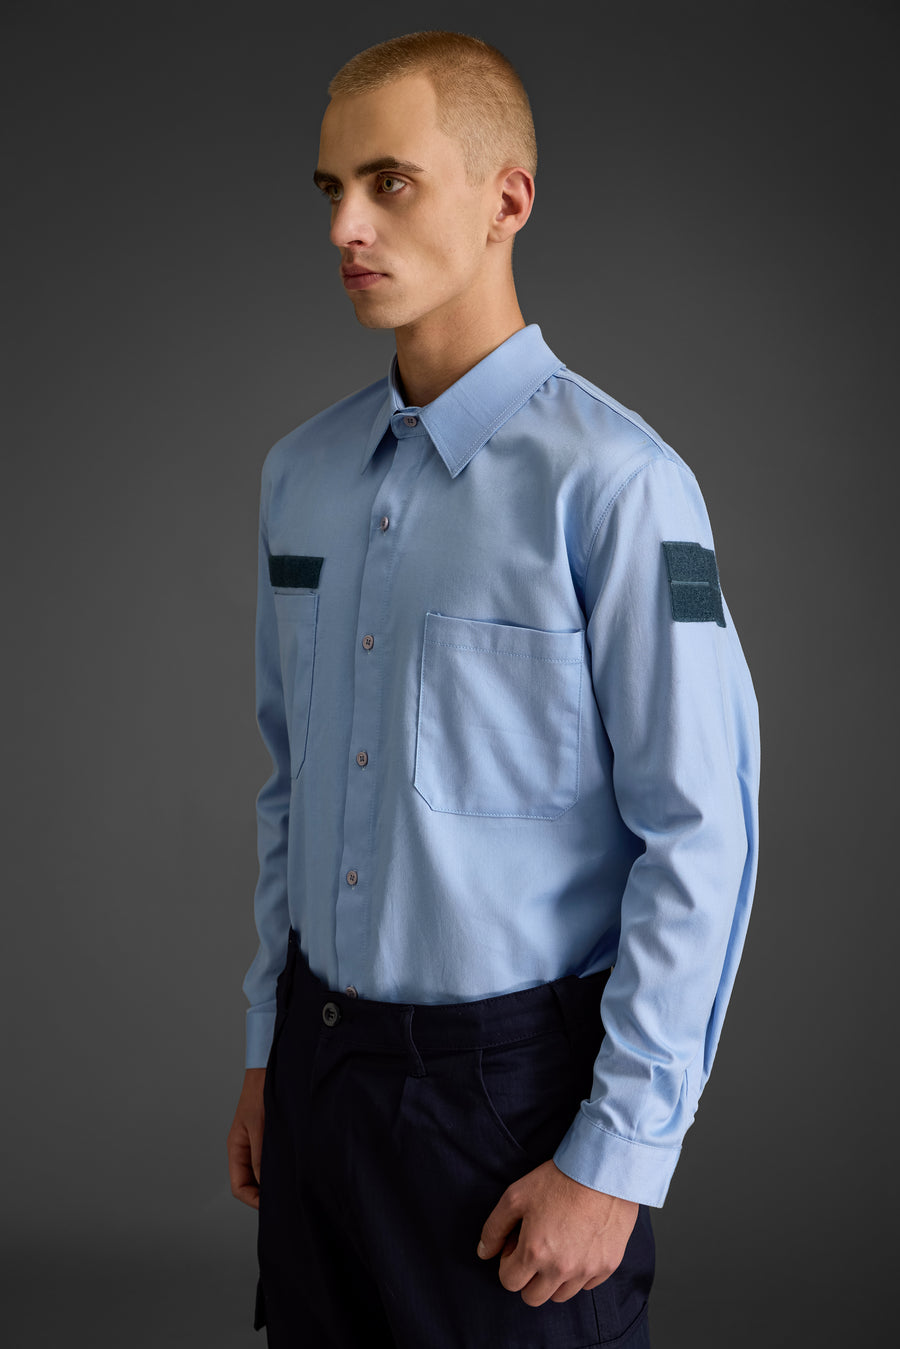 Official Shirt for Police & Gendarmerie forces